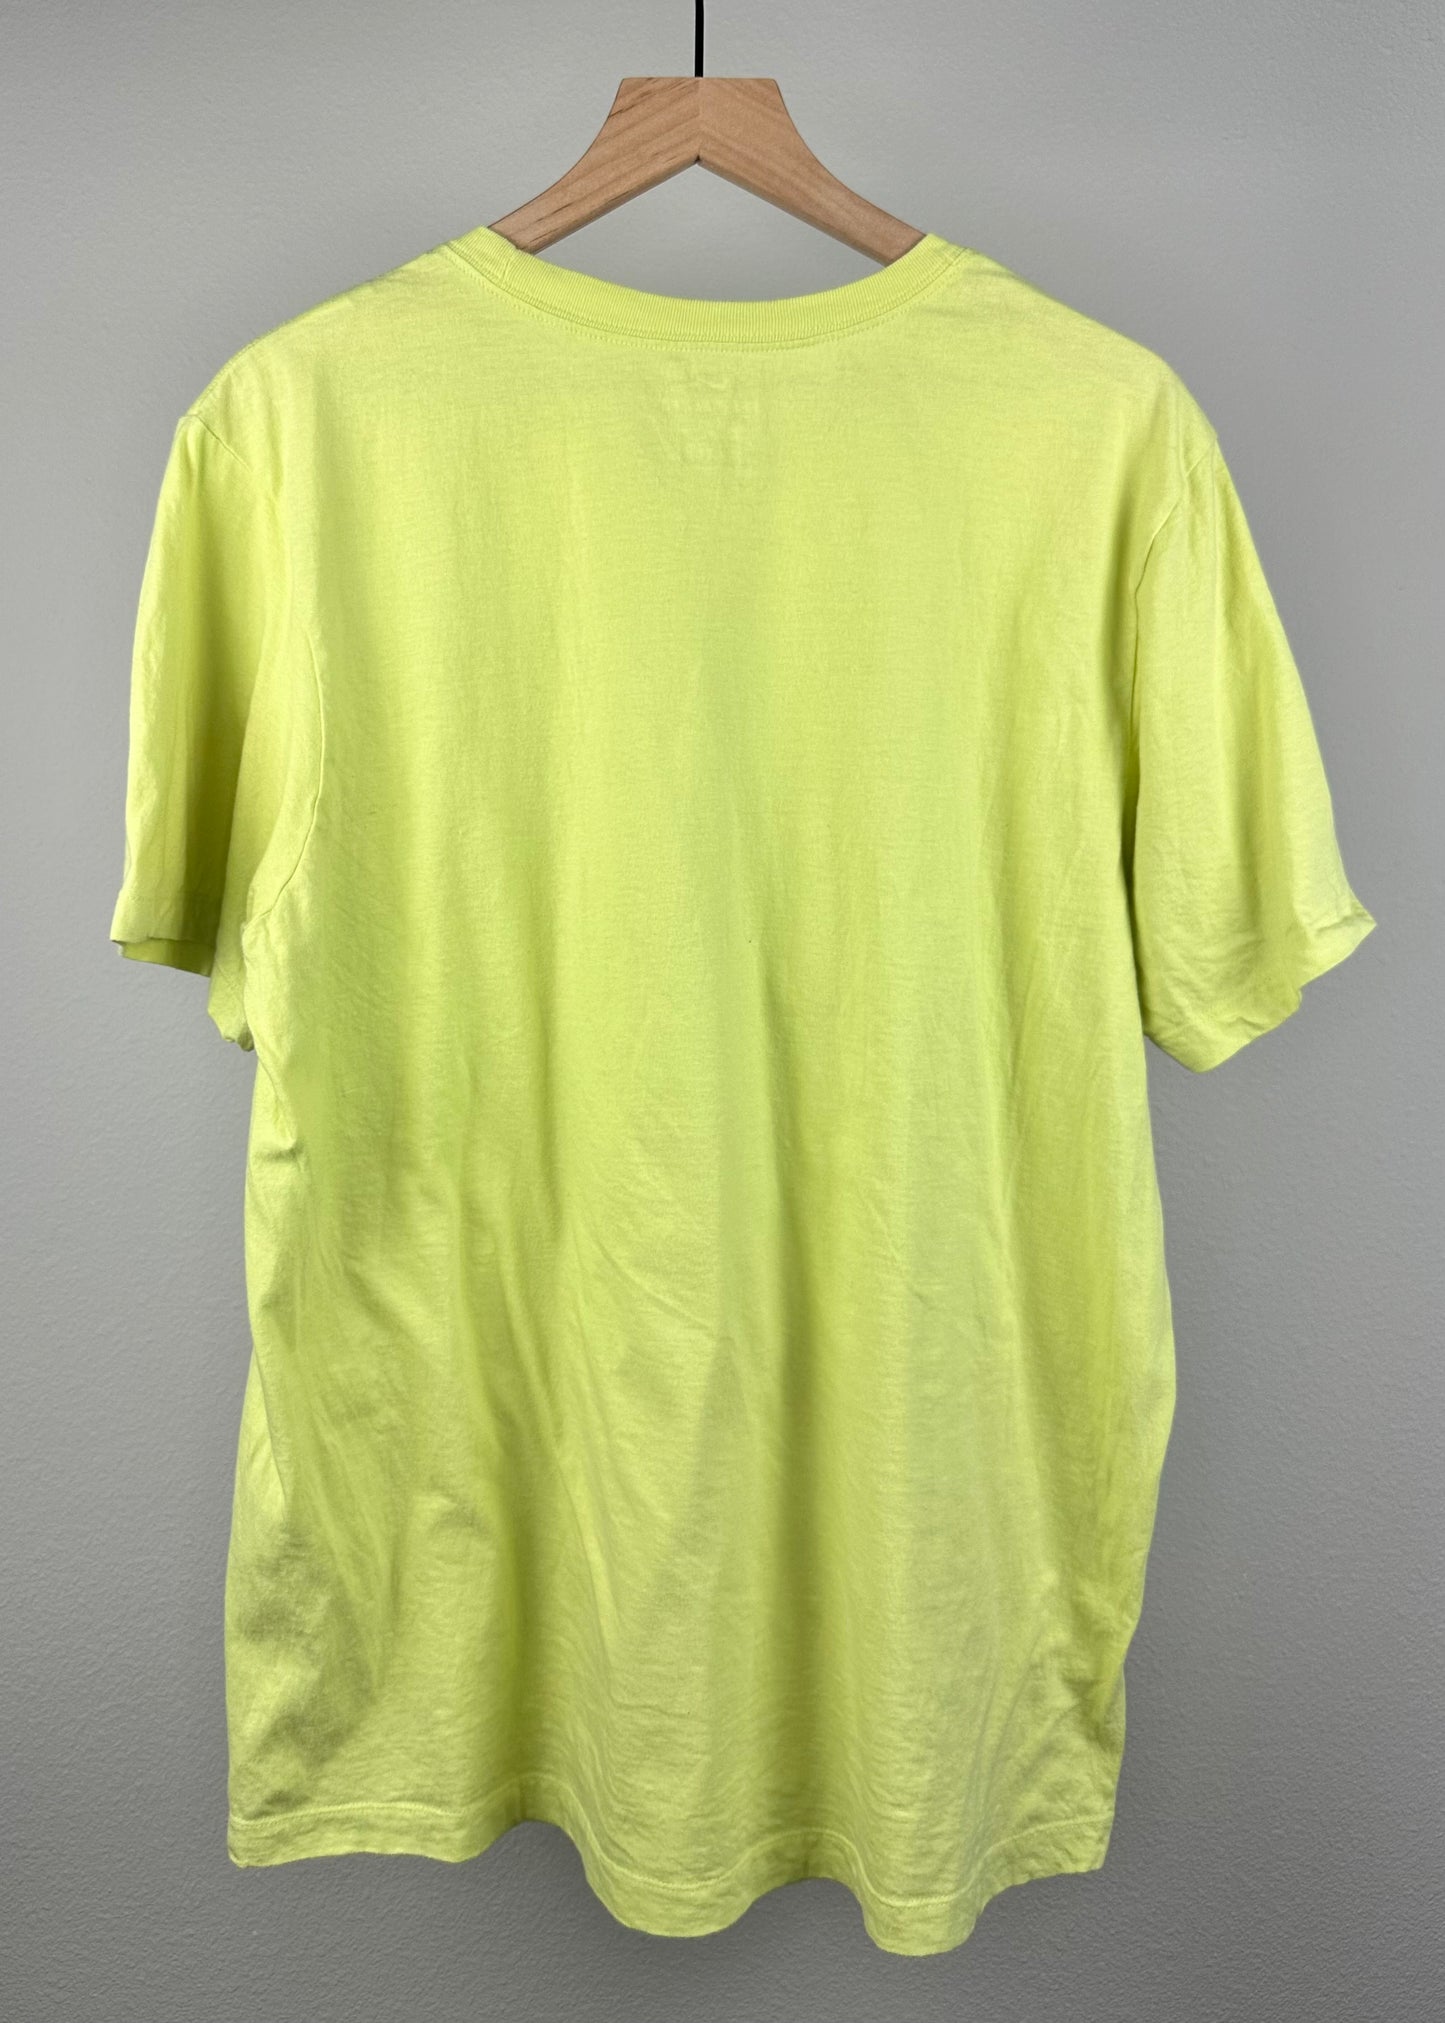 Lime Green Just Do It T-Shirt by Nike